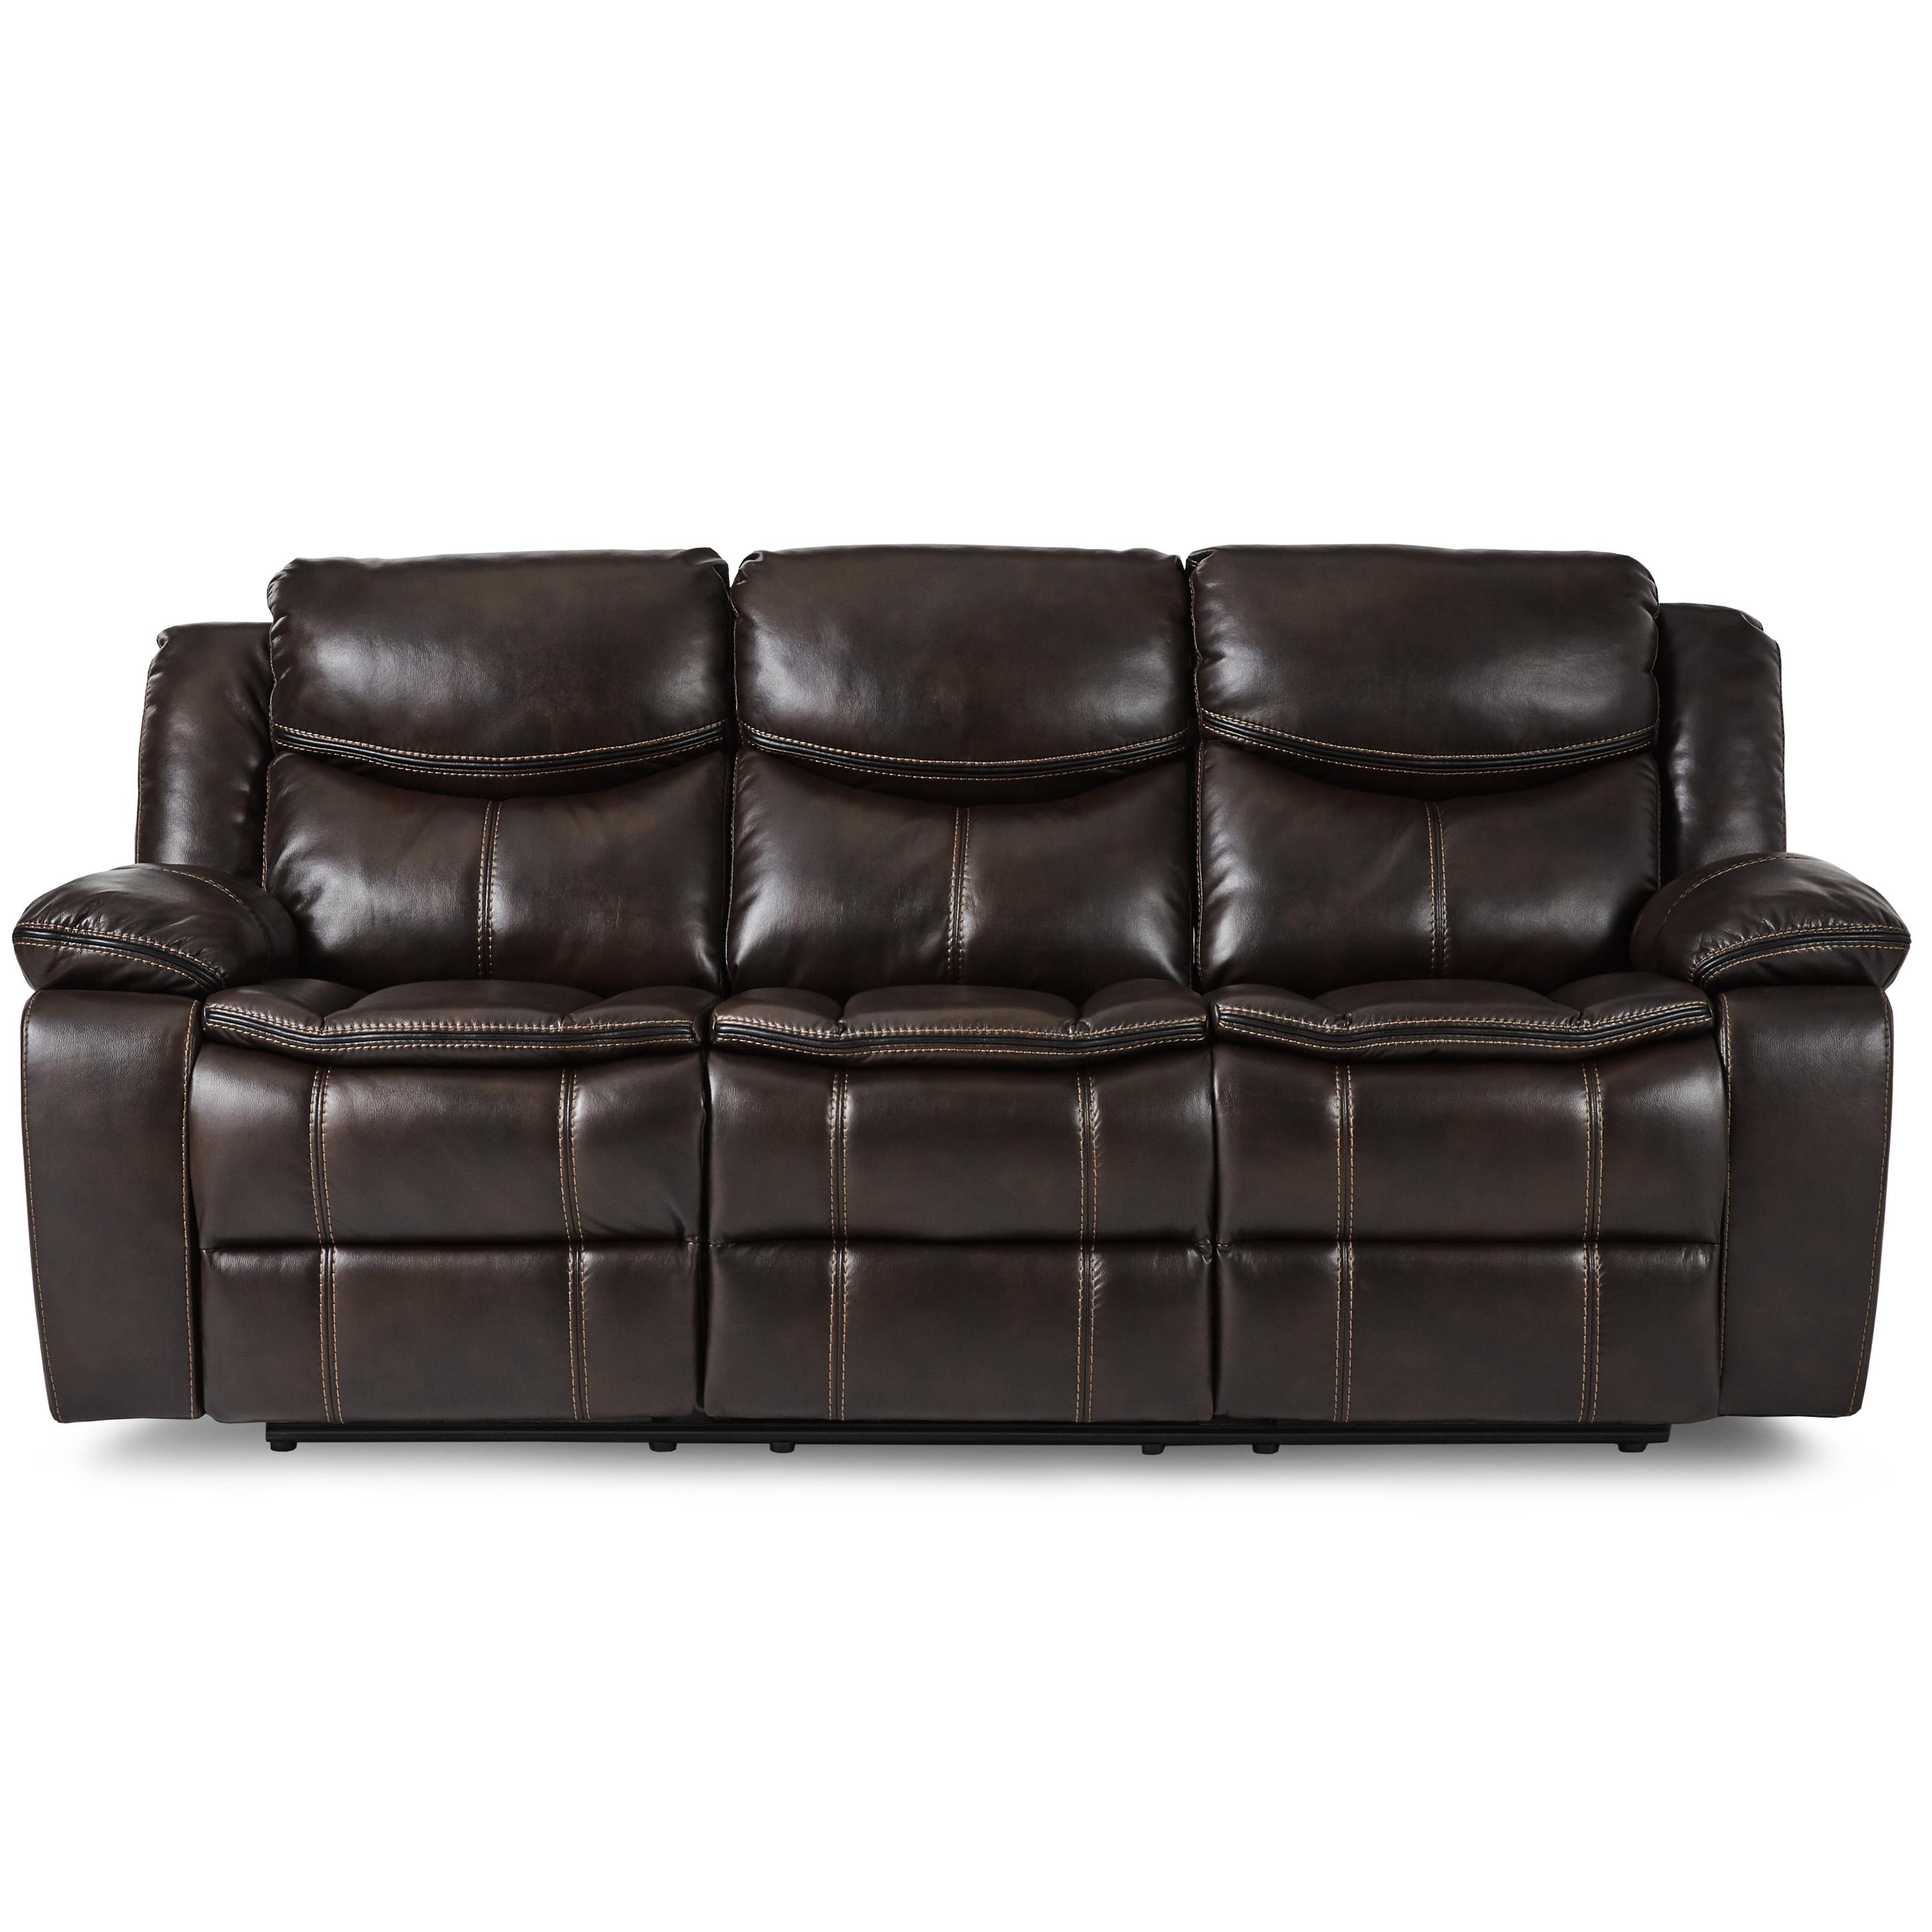 Transitional Reclining Sofa 8230BRW-3 Bastrop 8230BRW-3 in Brown Faux Leather